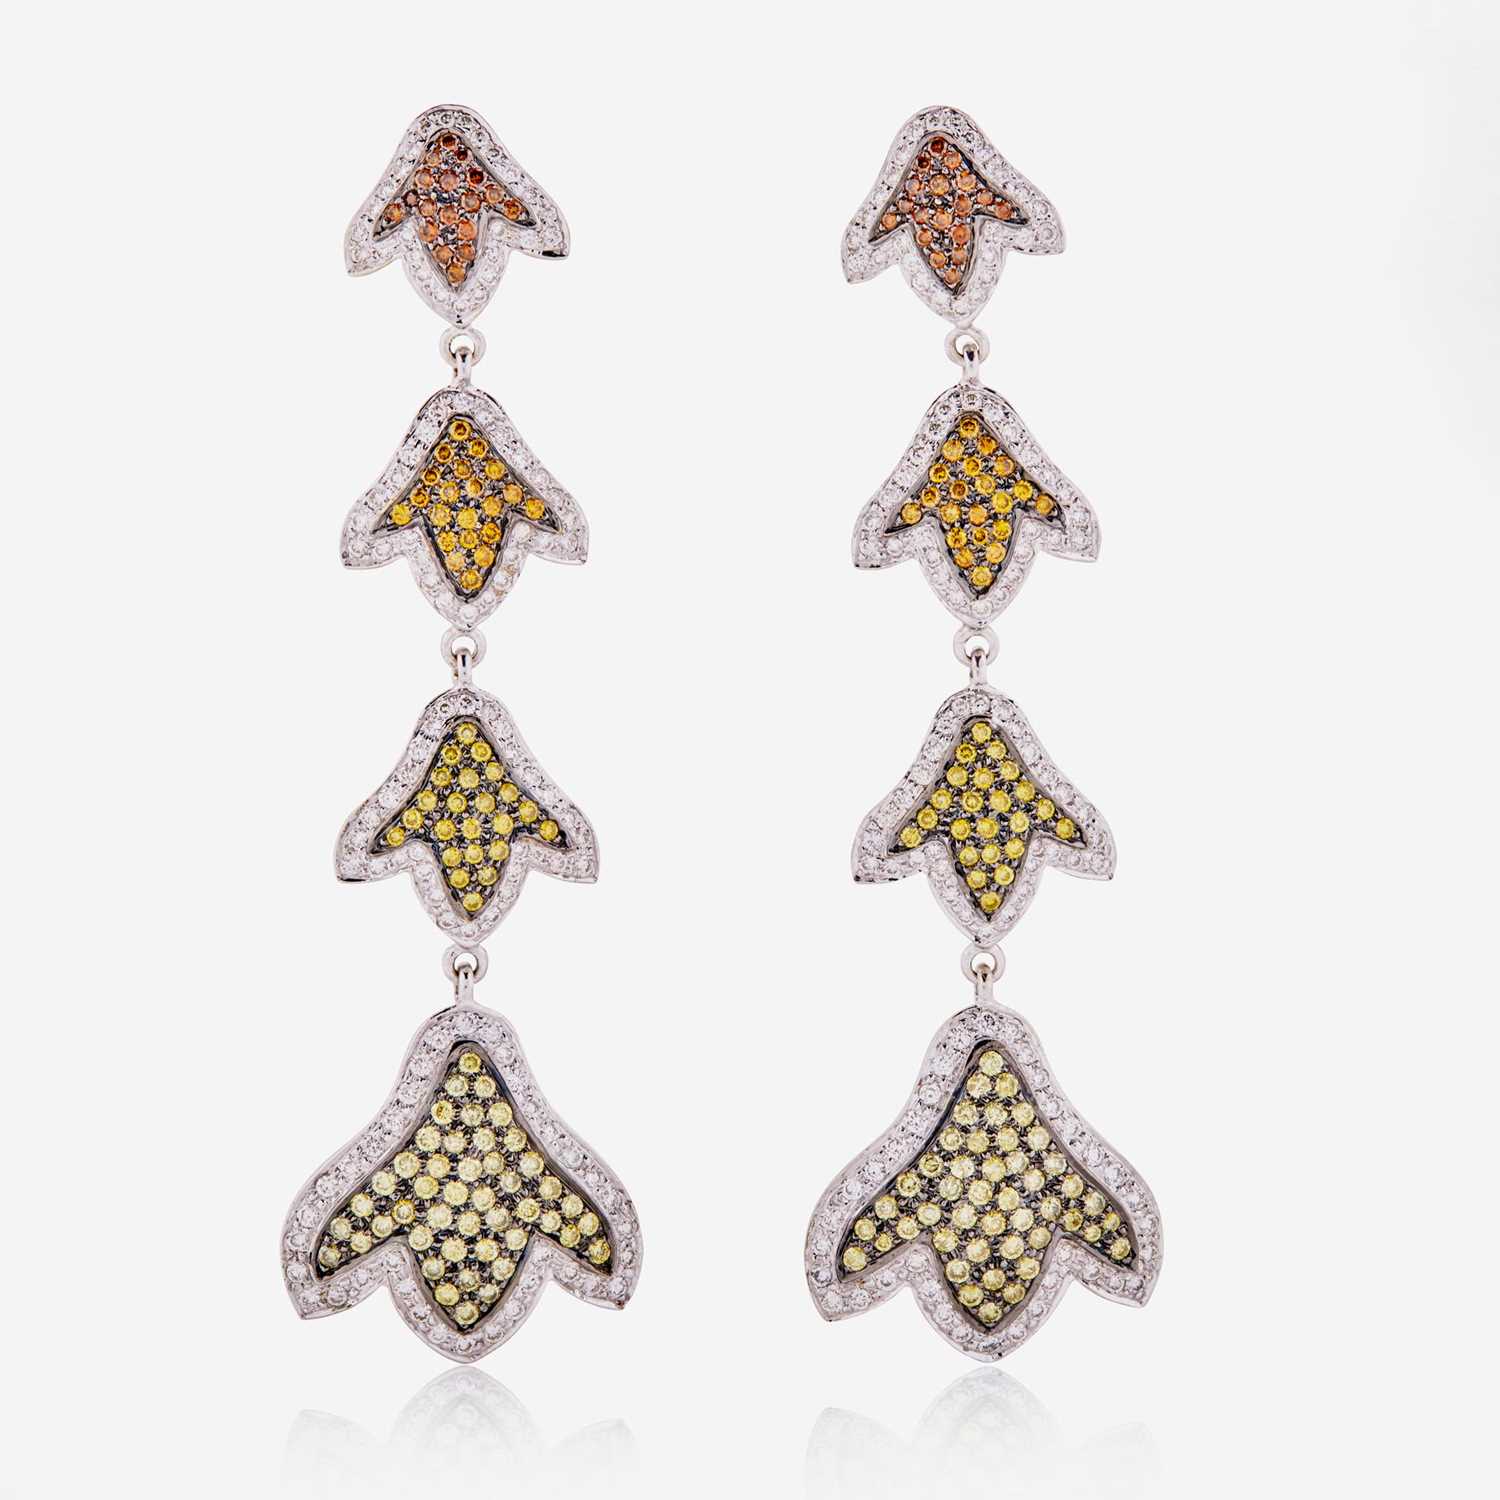 Lot 83 - A Pair of 18K White Gold and Multi-Color Diamond Earrings